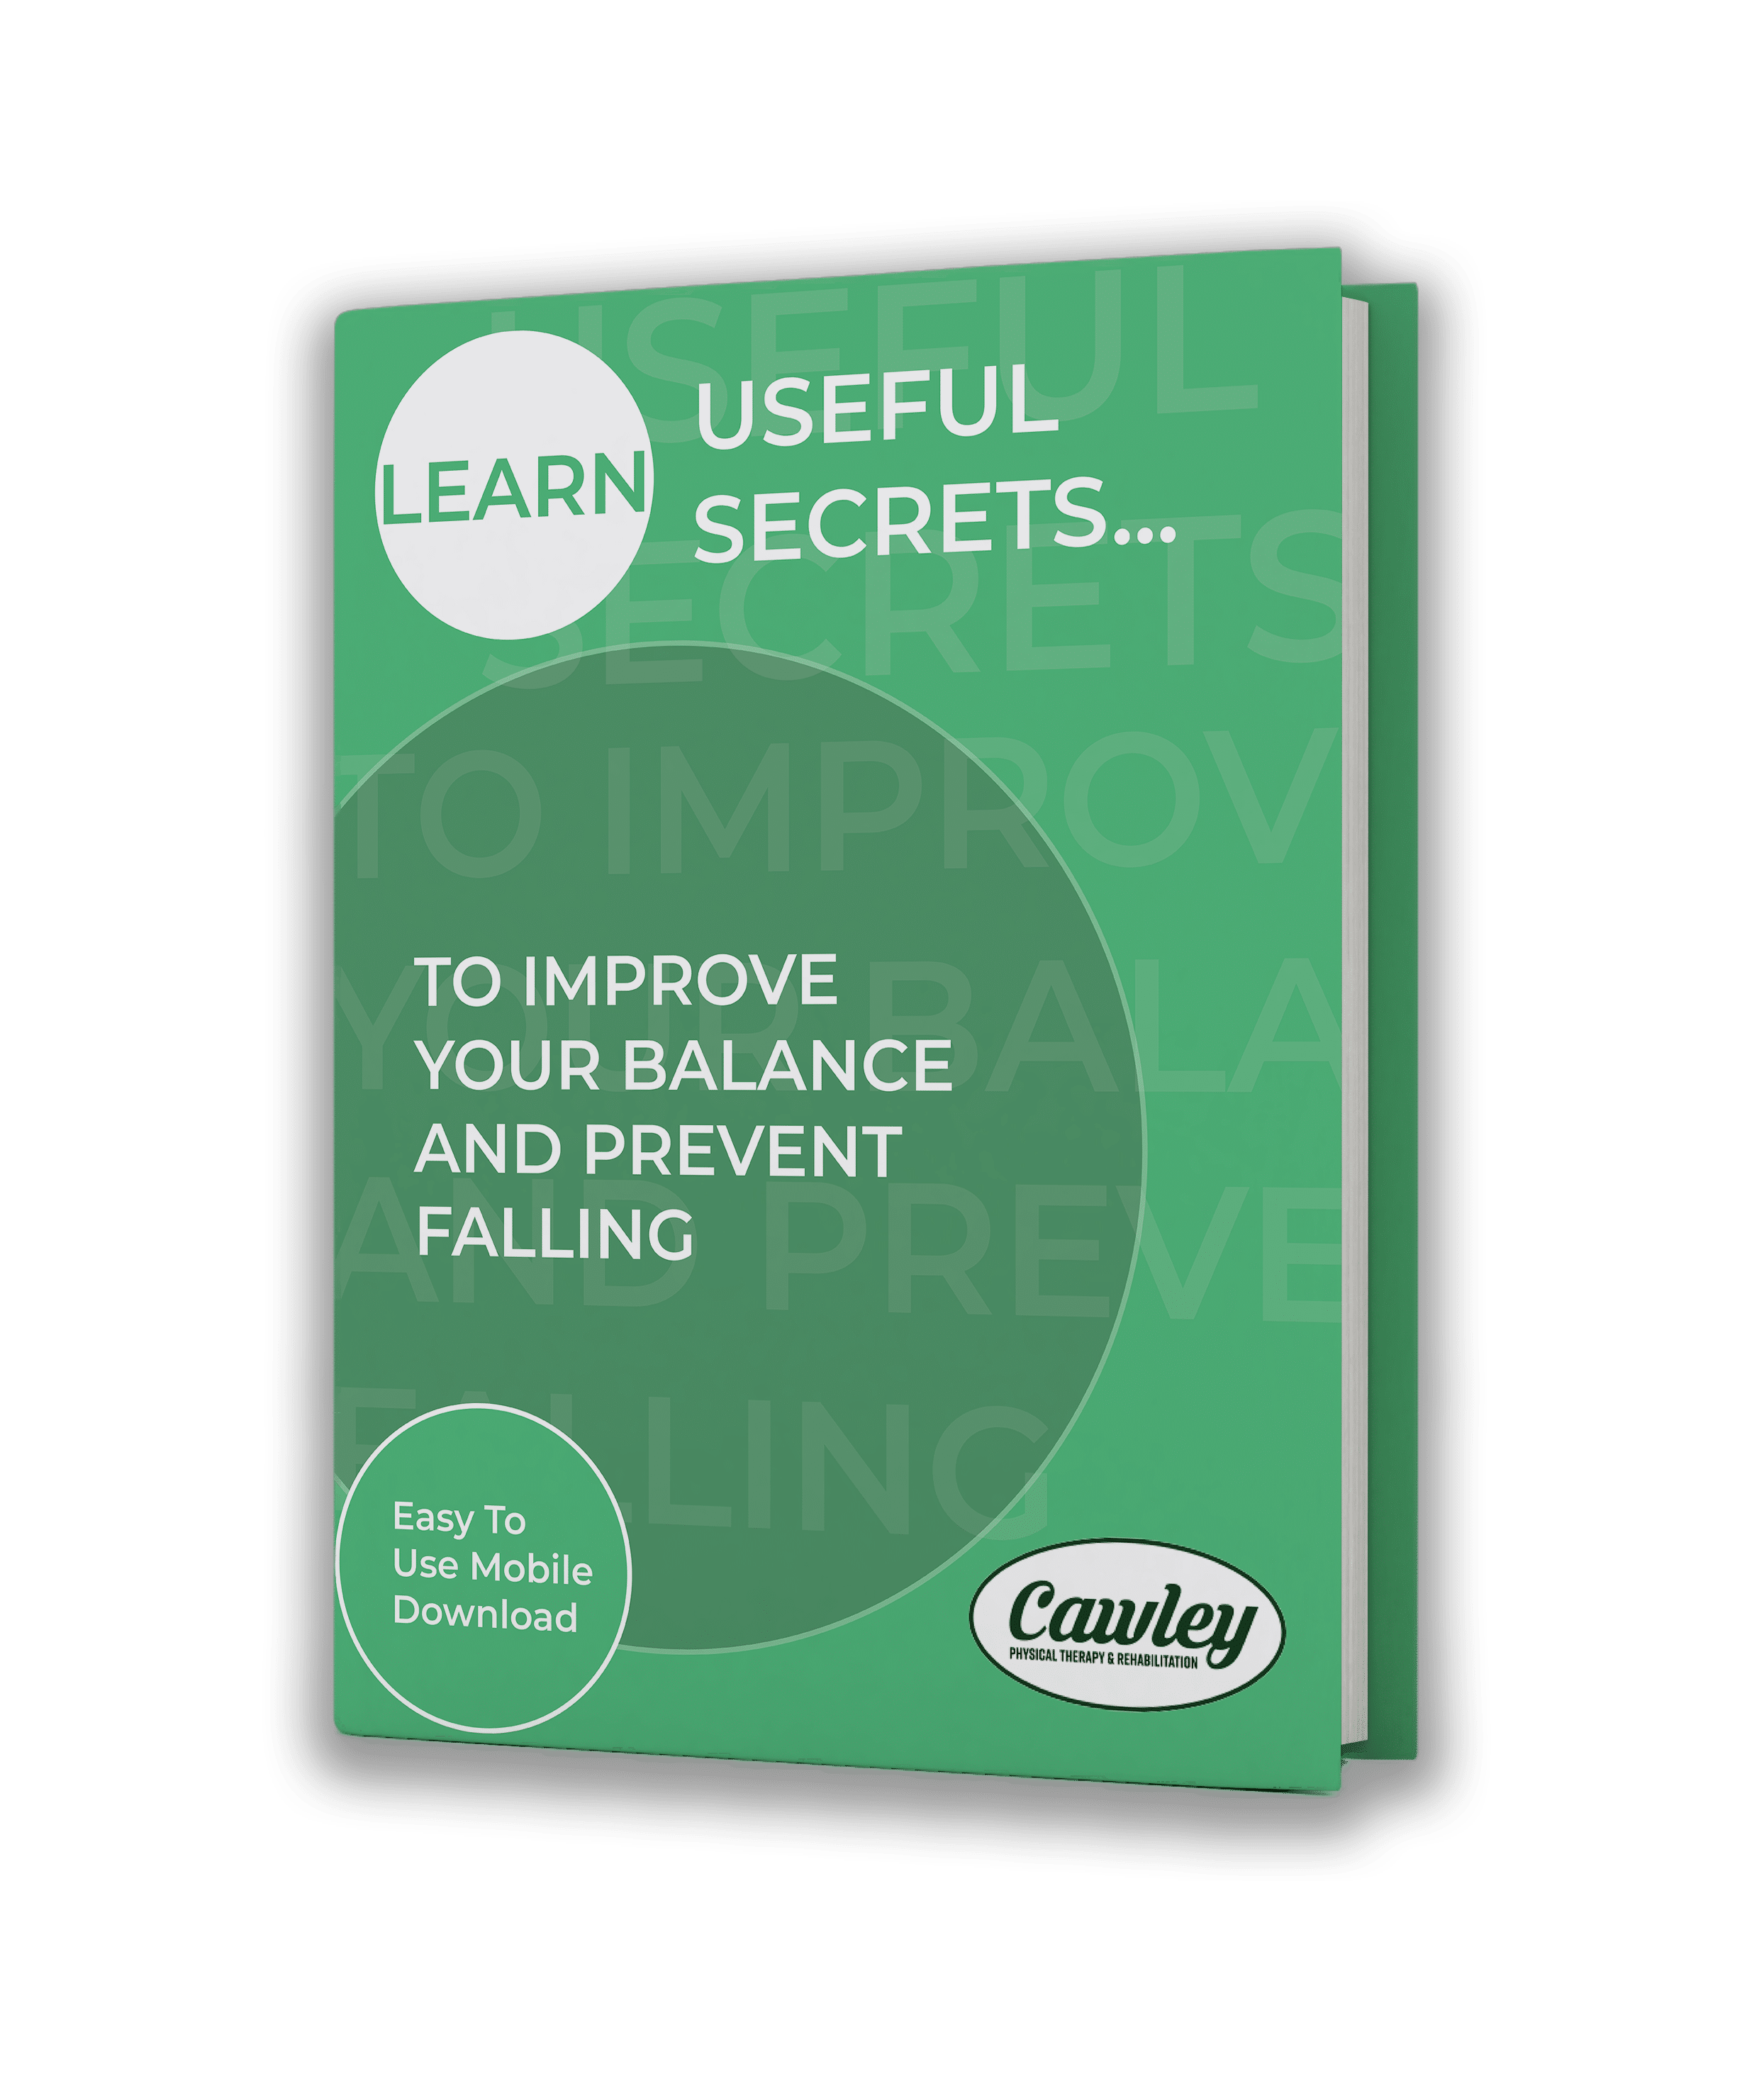 Learn Useful Secrets to Improve Your Balance and Prevent Falling